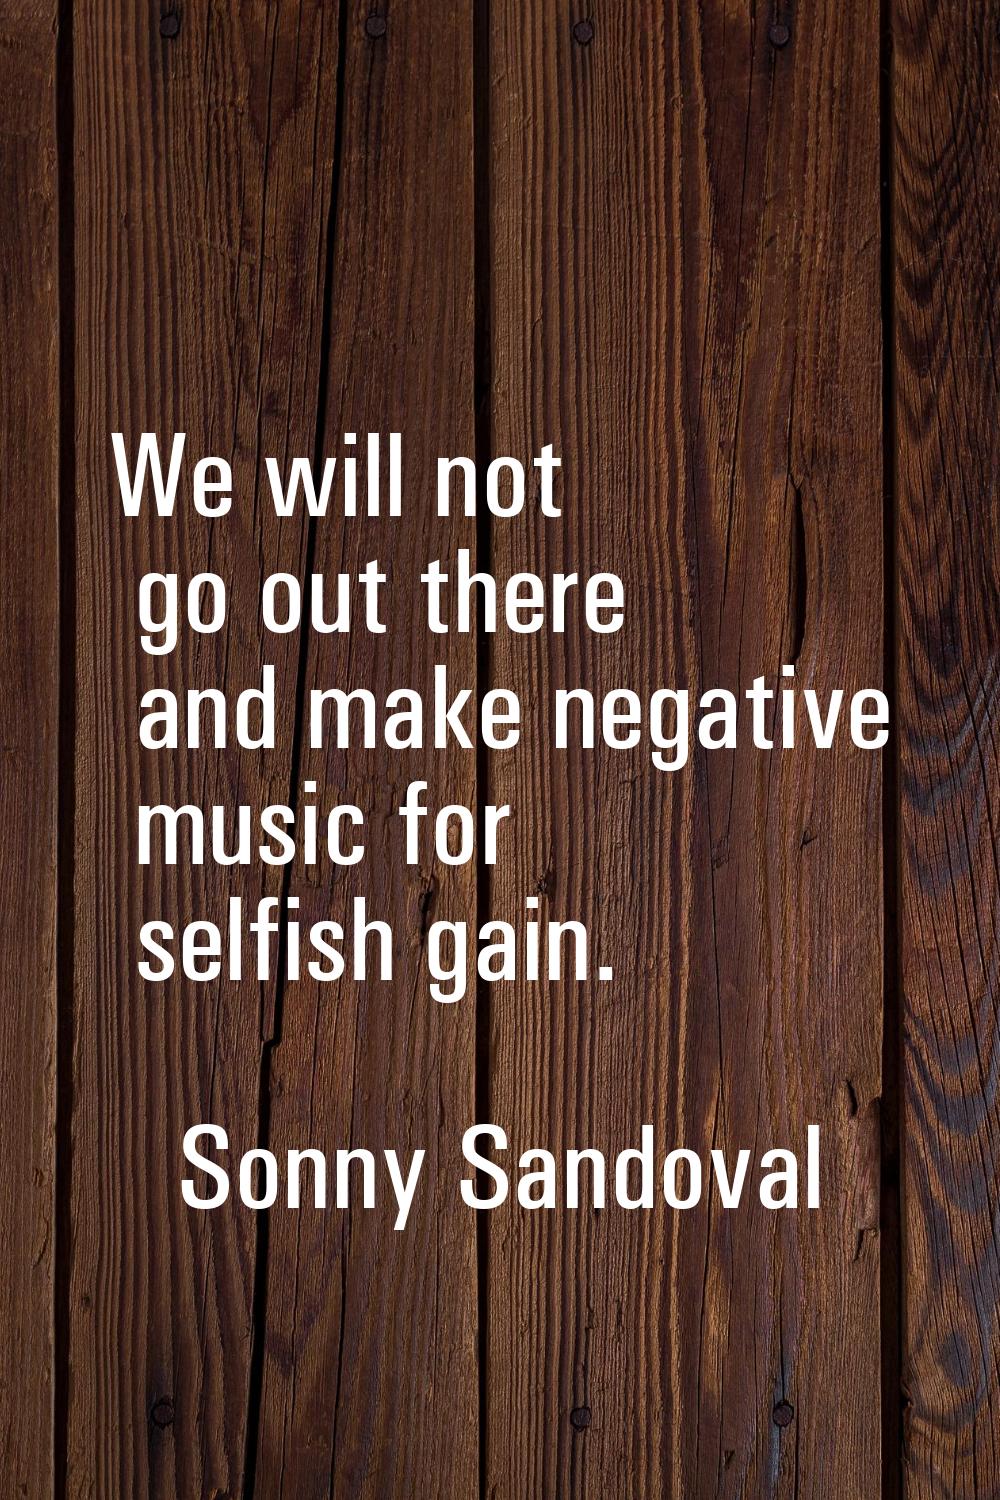 We will not go out there and make negative music for selfish gain.